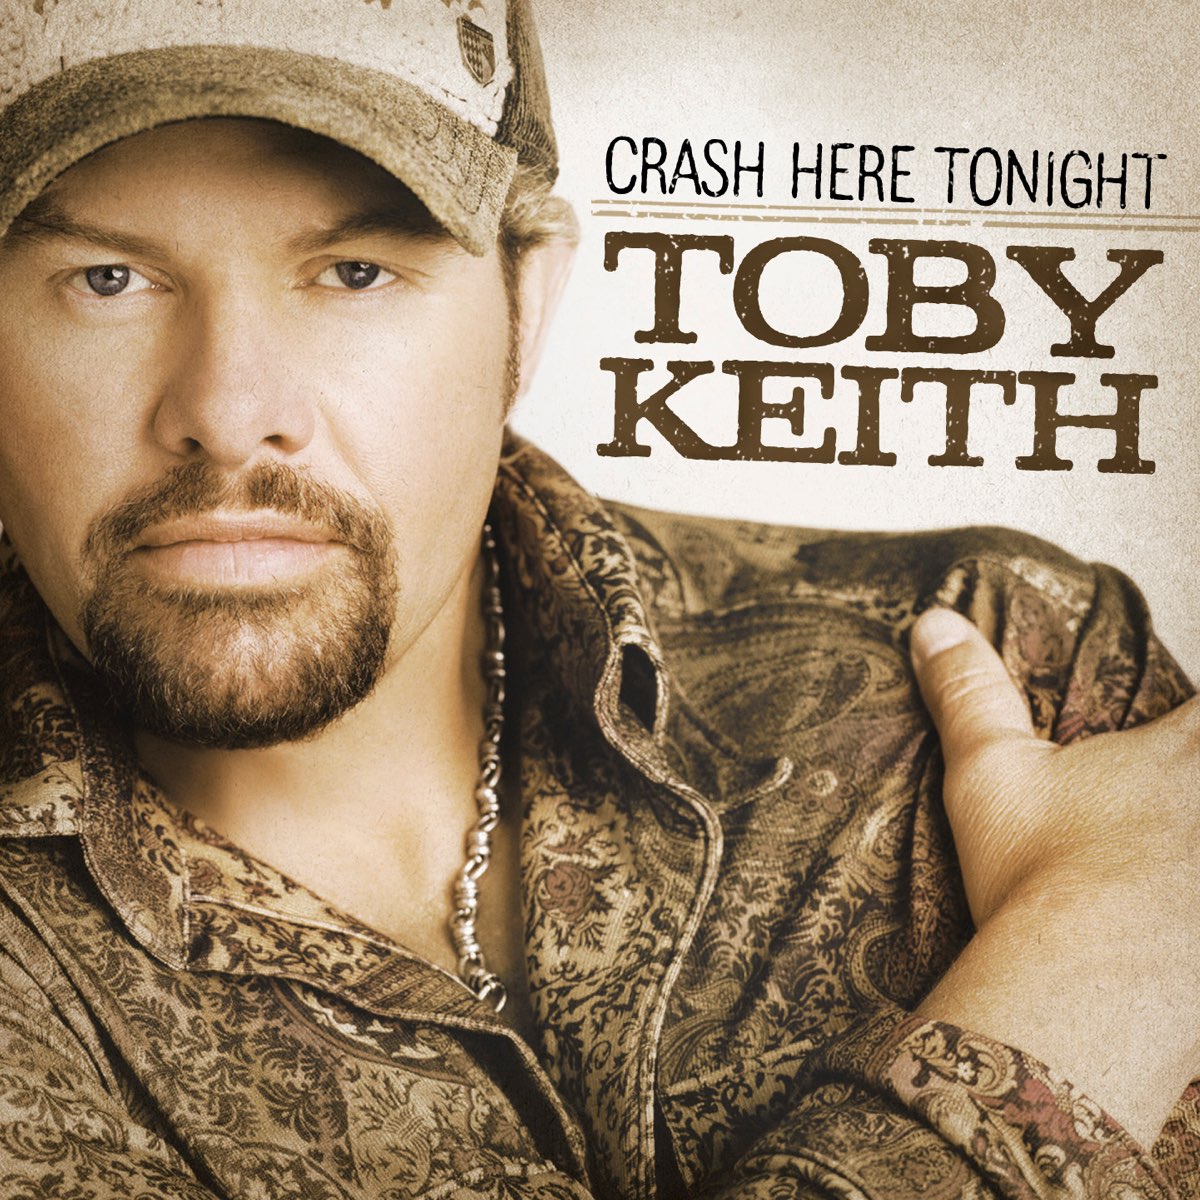 ‎Crash Here Tonight - Single by Toby Keith on Apple Music